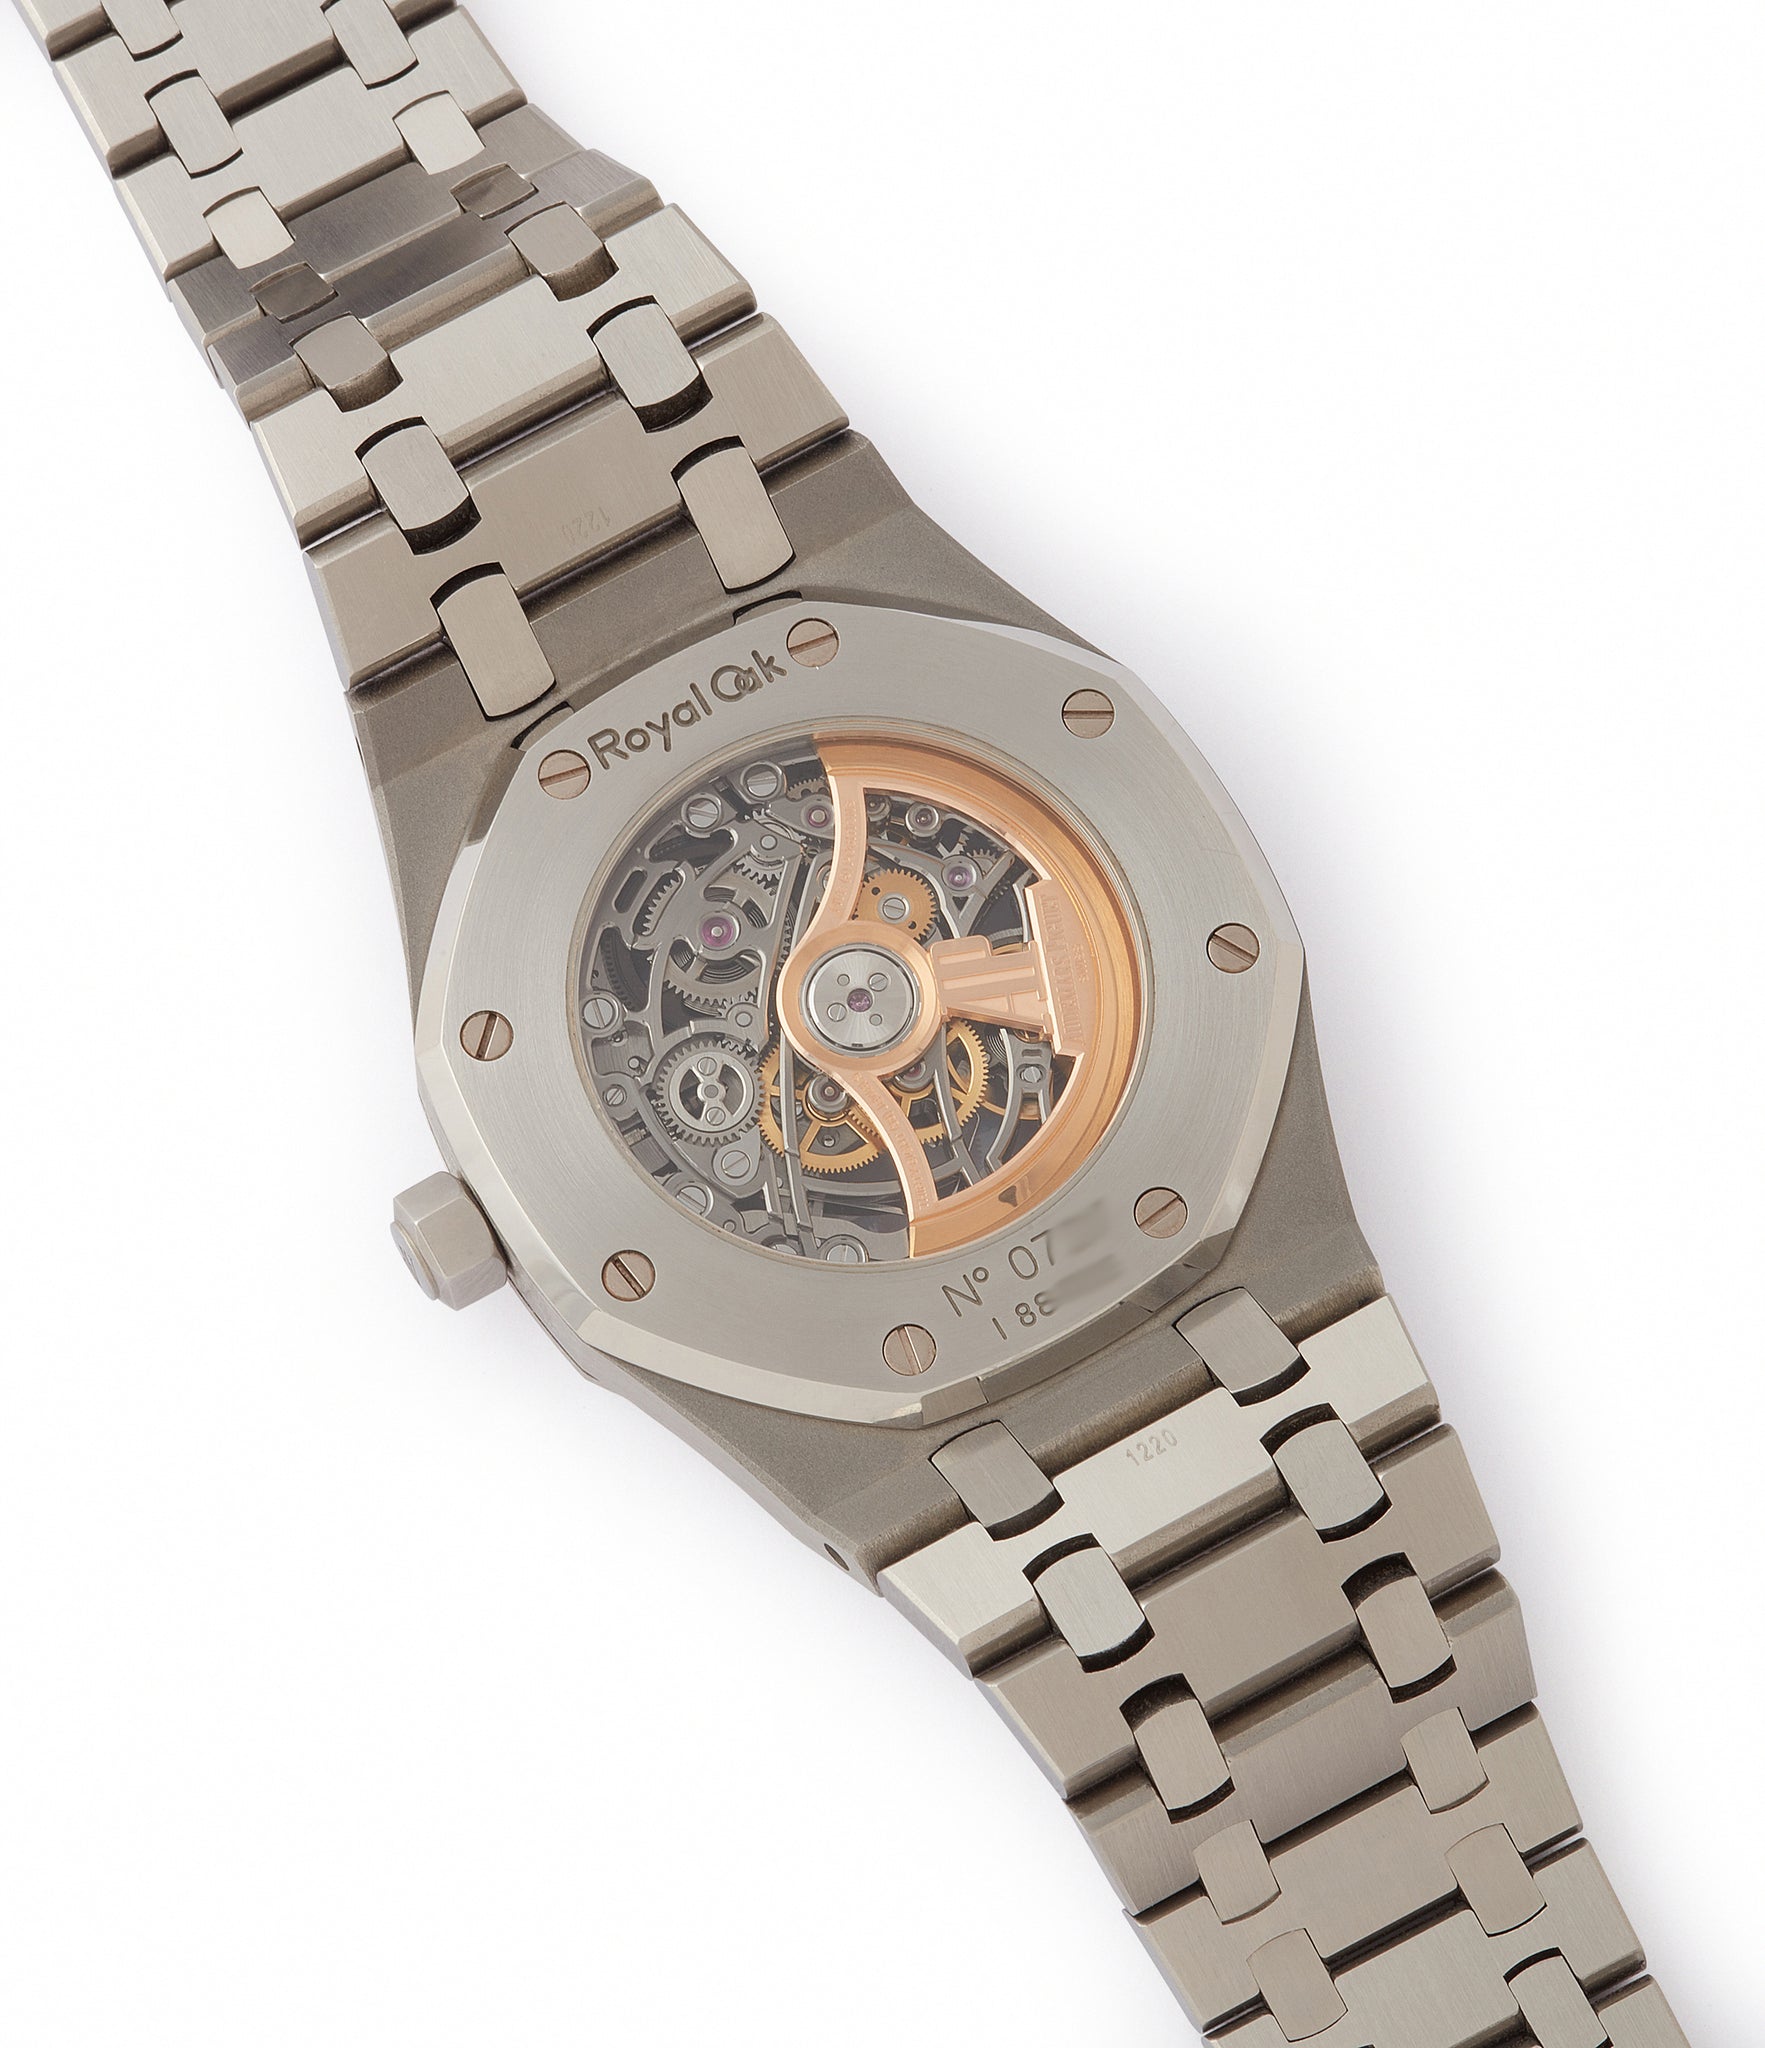 AP 3129 calibre Audemars Piguet Royal Oak skeletonised 15305ST steel watch for sale online at A Collected Man London UK specialist of rare watches